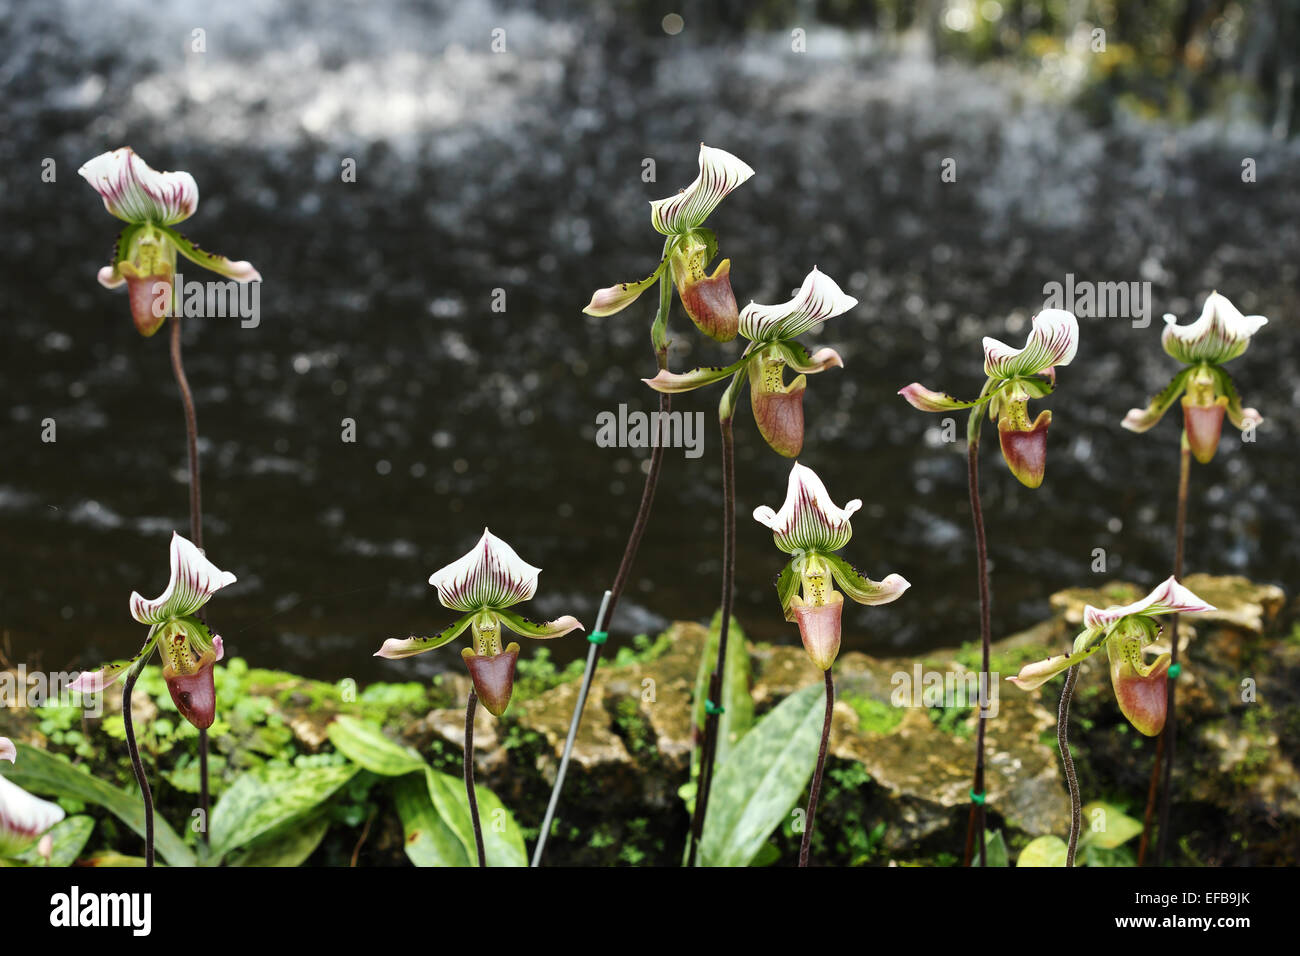 Lady Slipper Orchid Paphiopedilum in the garden Stock Photo